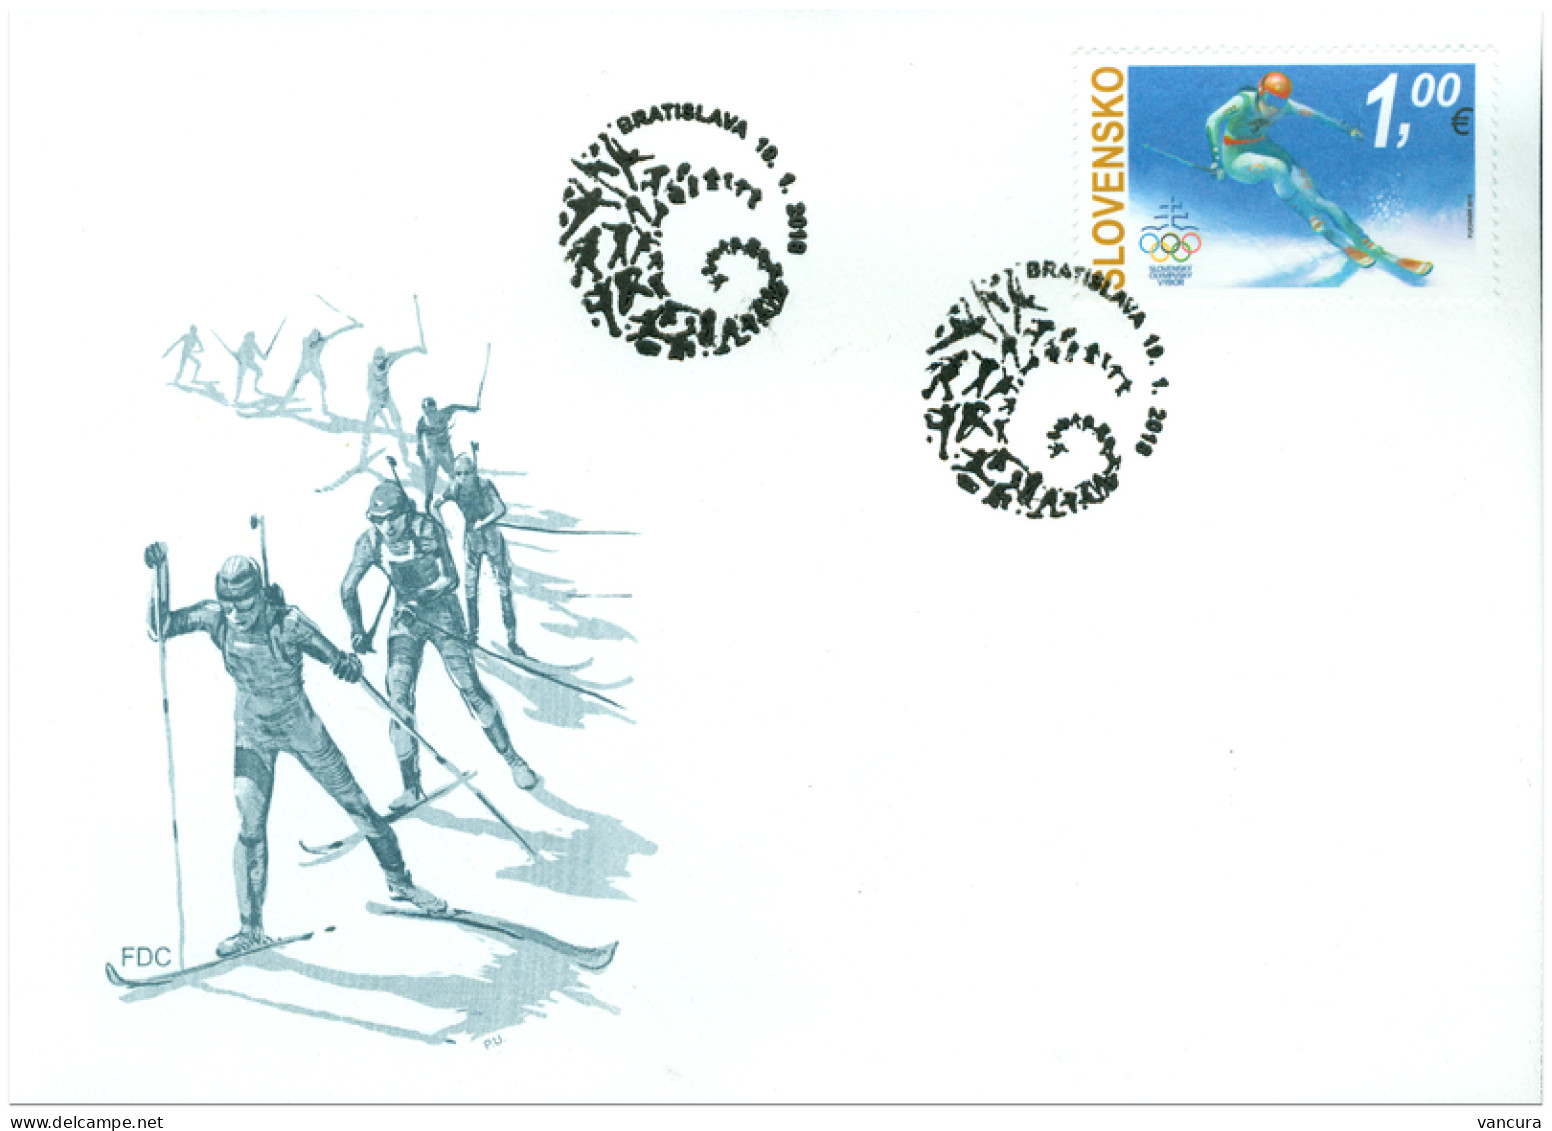 FDC 653 And 655 Slovakia. Winter Olympic Games Pyeongchang And Paralympic Games 2018 - Invierno 2018 : Pieonchang